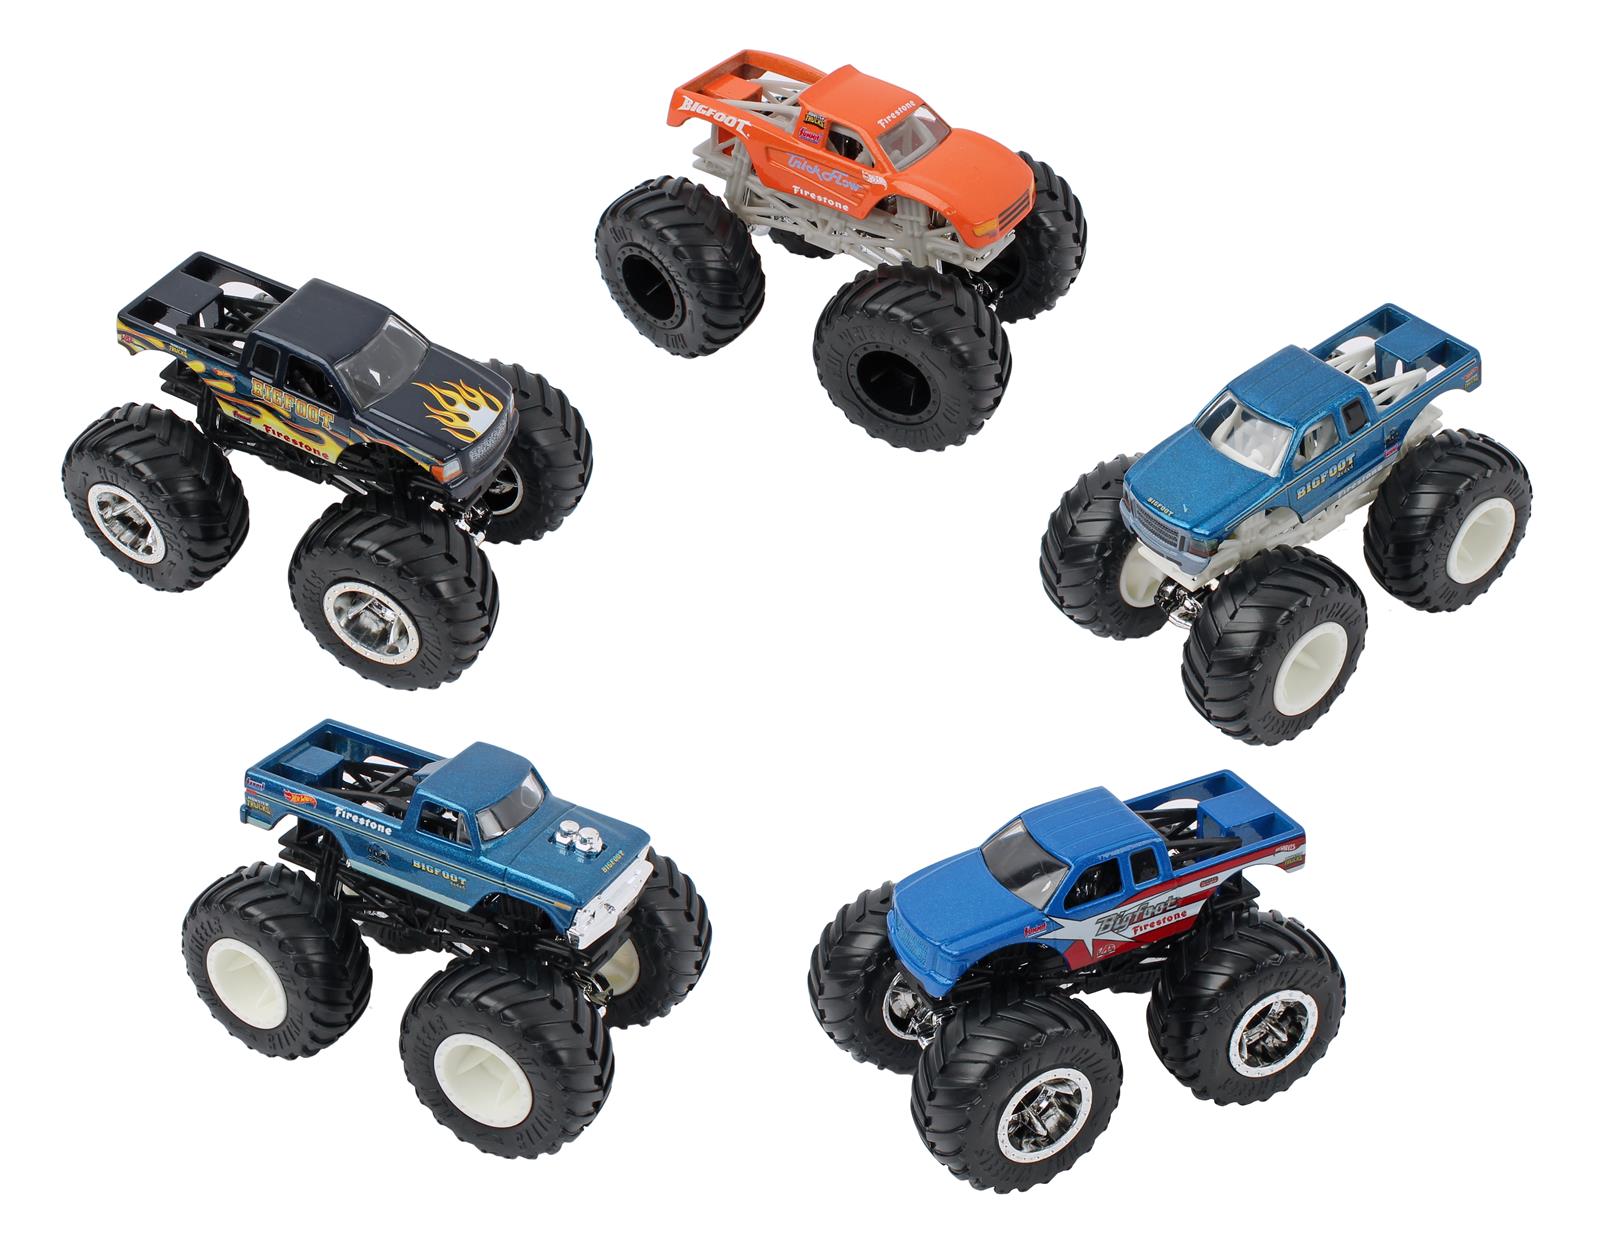 Bigfoot 4x4 Hgr40 9993 164 Scale Hot Wheels Bigfoot® Legacy Collection Diecast Summit Racing 0676